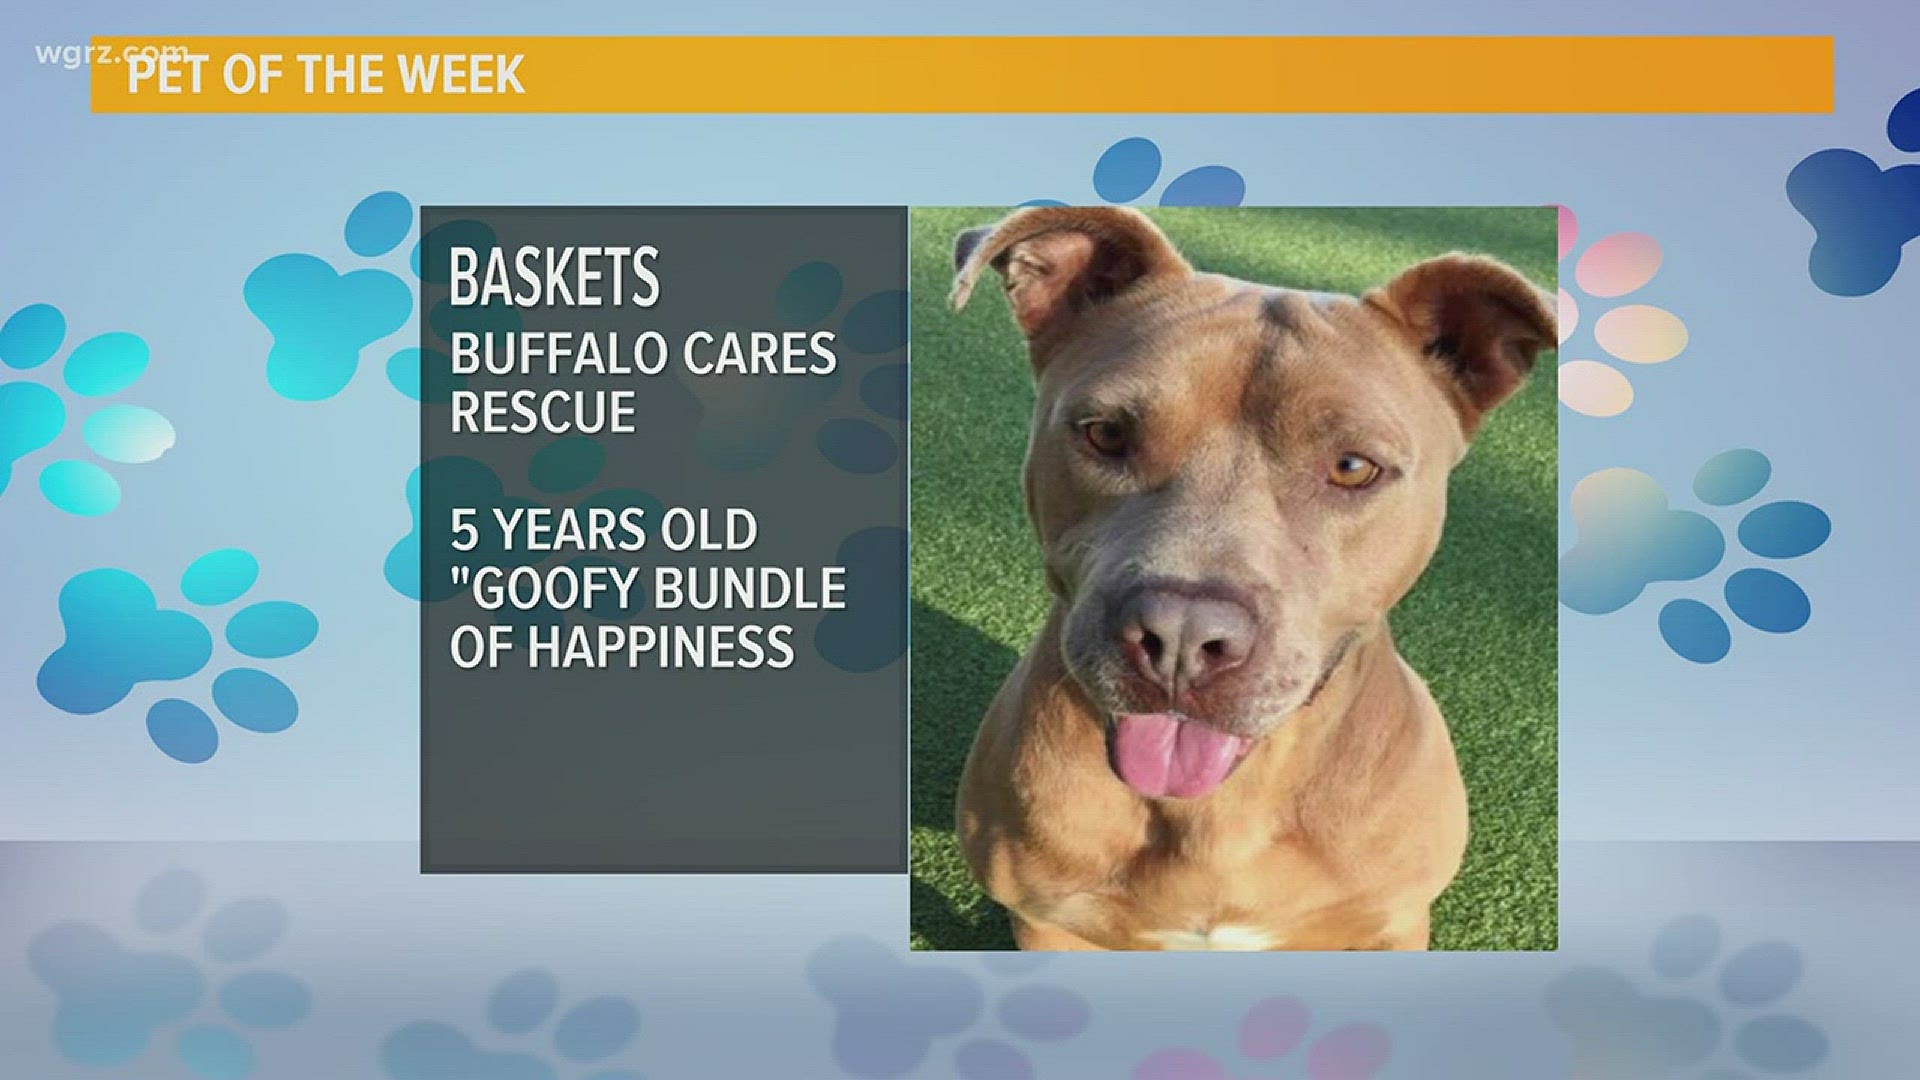 Baskets is a handsome, friendly fellow searching for his forever home.